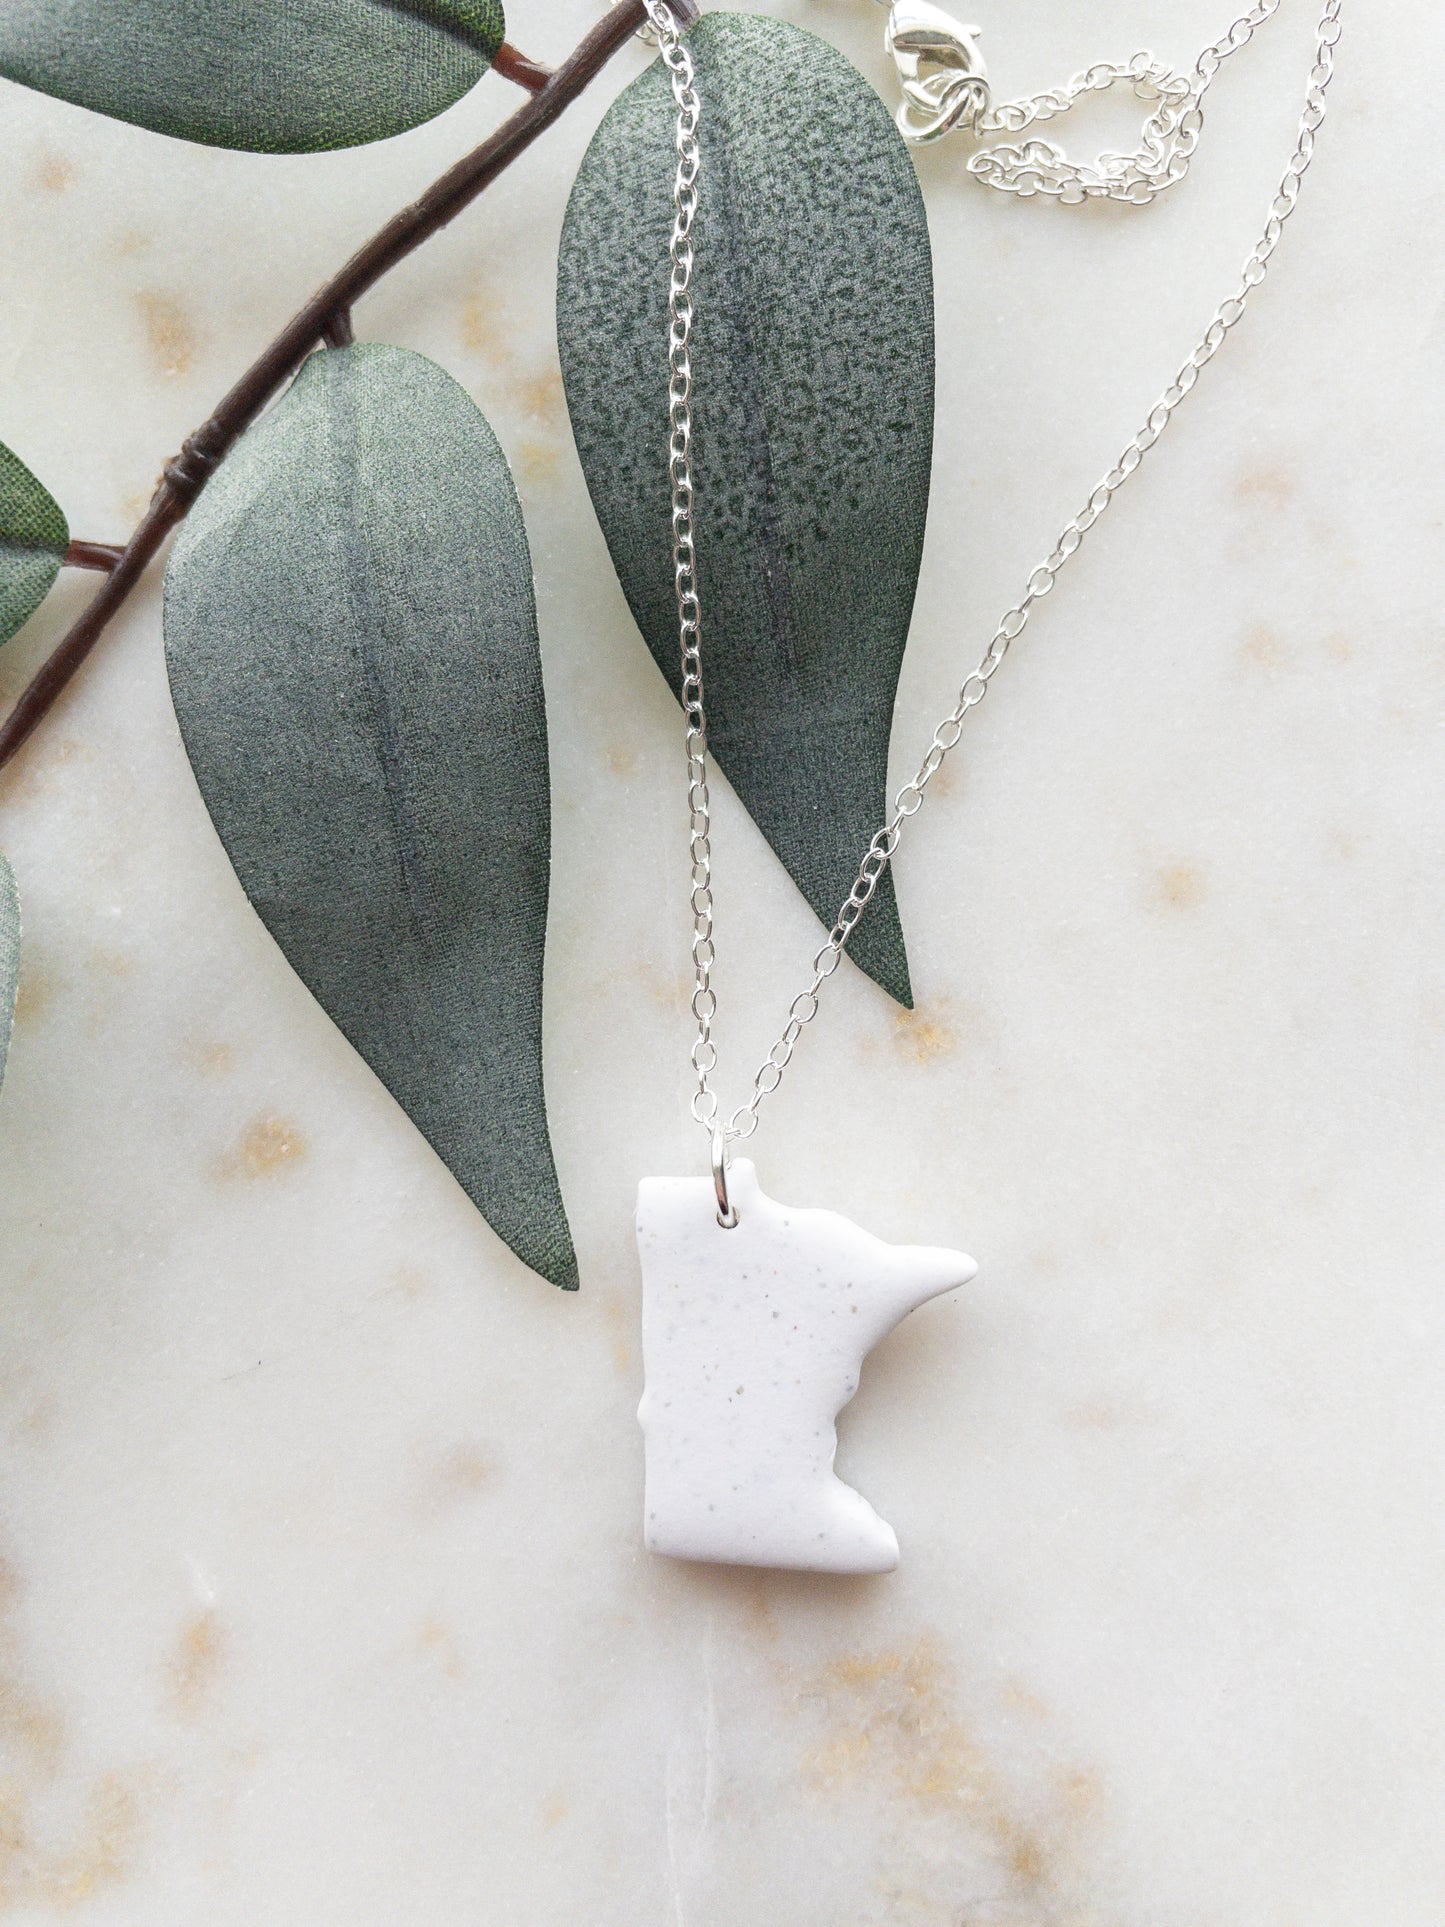 clay necklace | Minnesota necklace